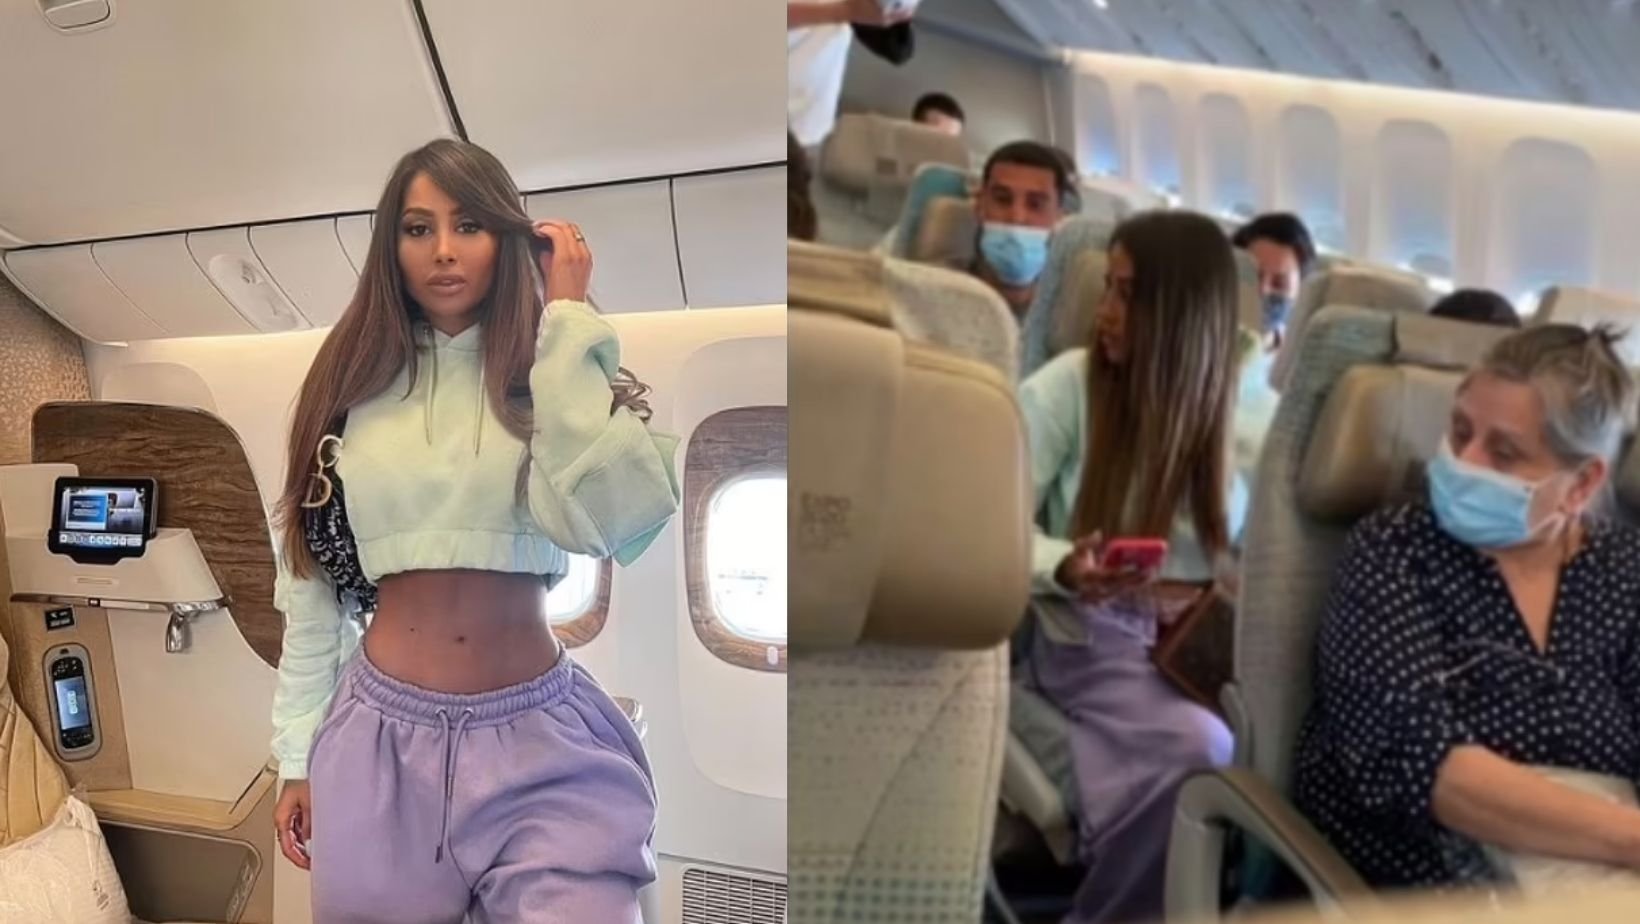 1 23.jpg?resize=1200,630 - Influencer Is Caught Faking Her Business Class Flight After A Fan Spotted Her Sitting In Economy